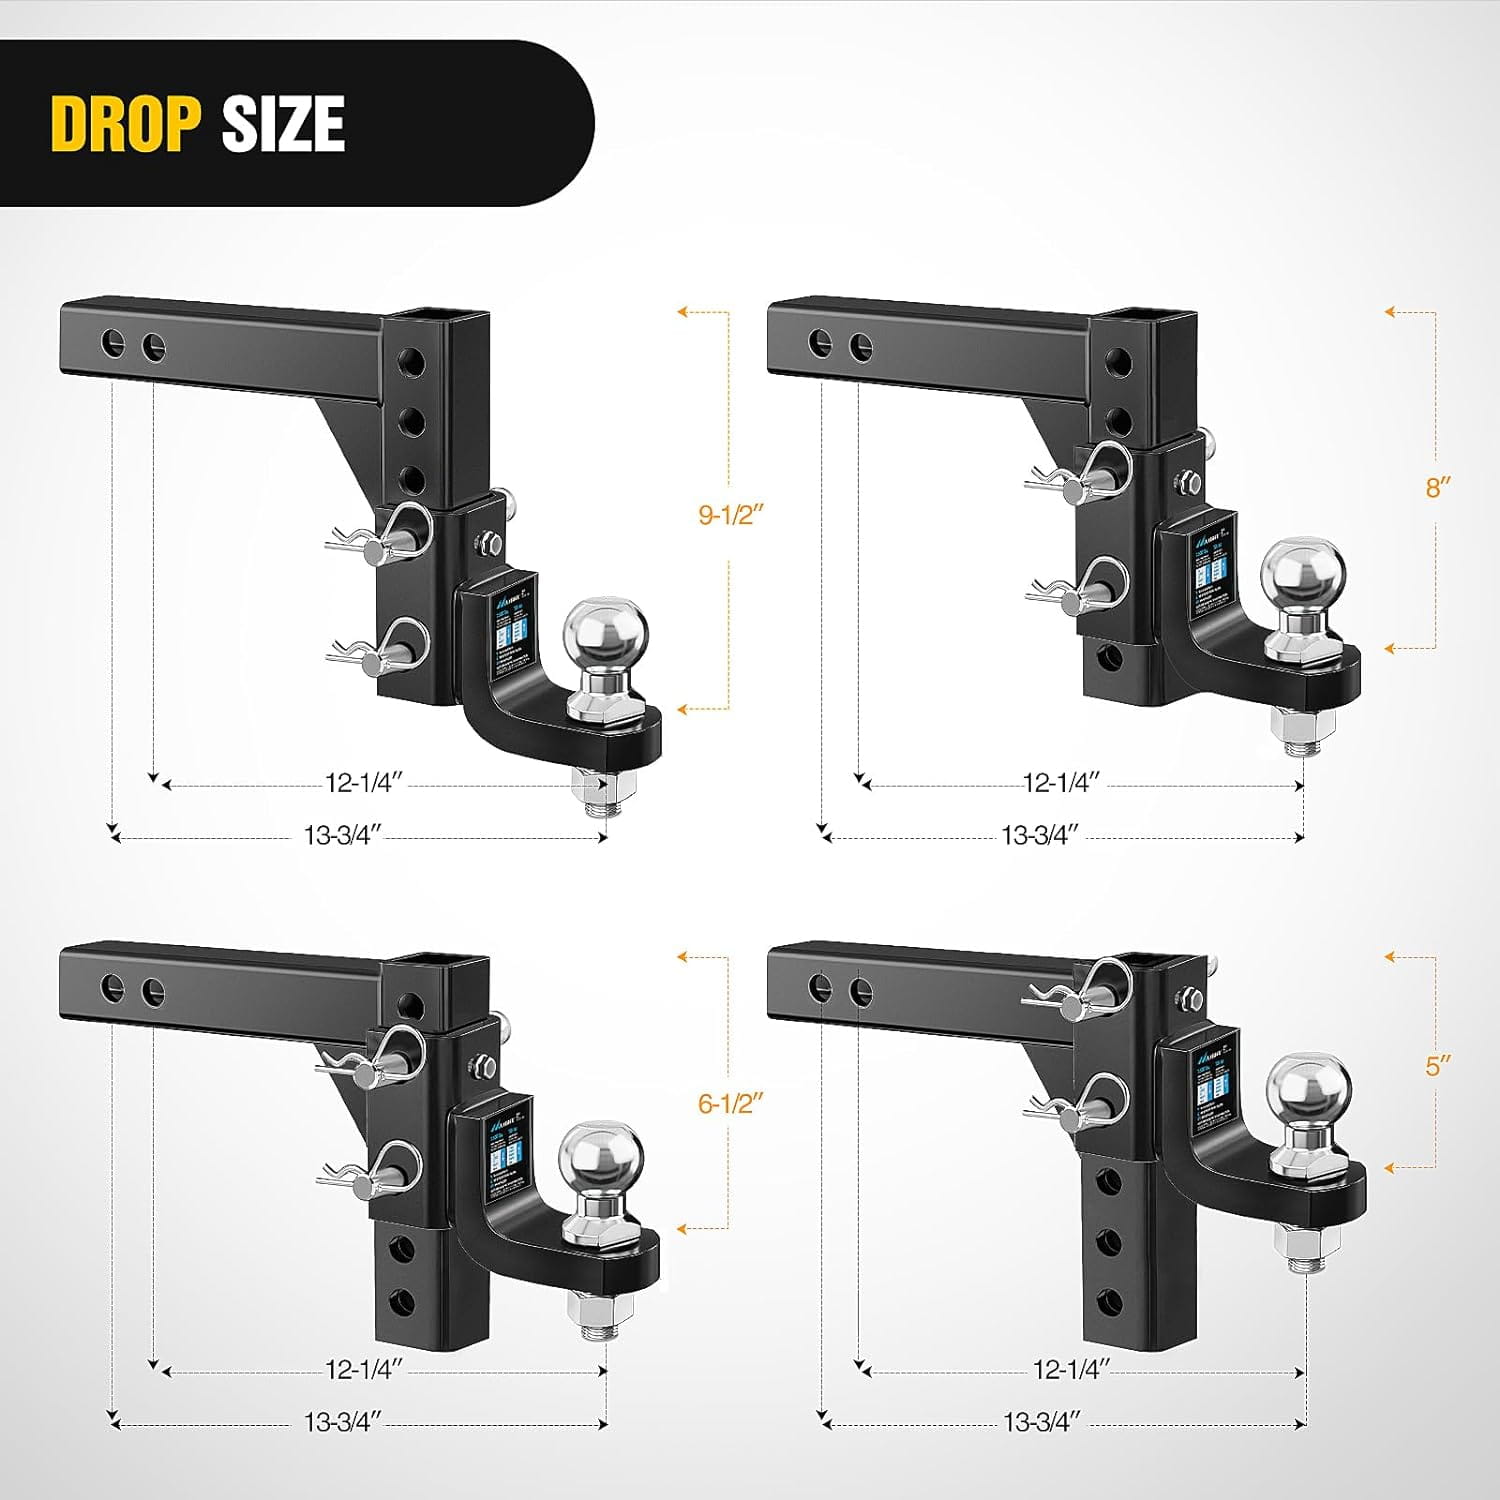 8 Position Adjustable Trailer Hitch Ball Mount with 2 Inch Trailer Ball Nilight